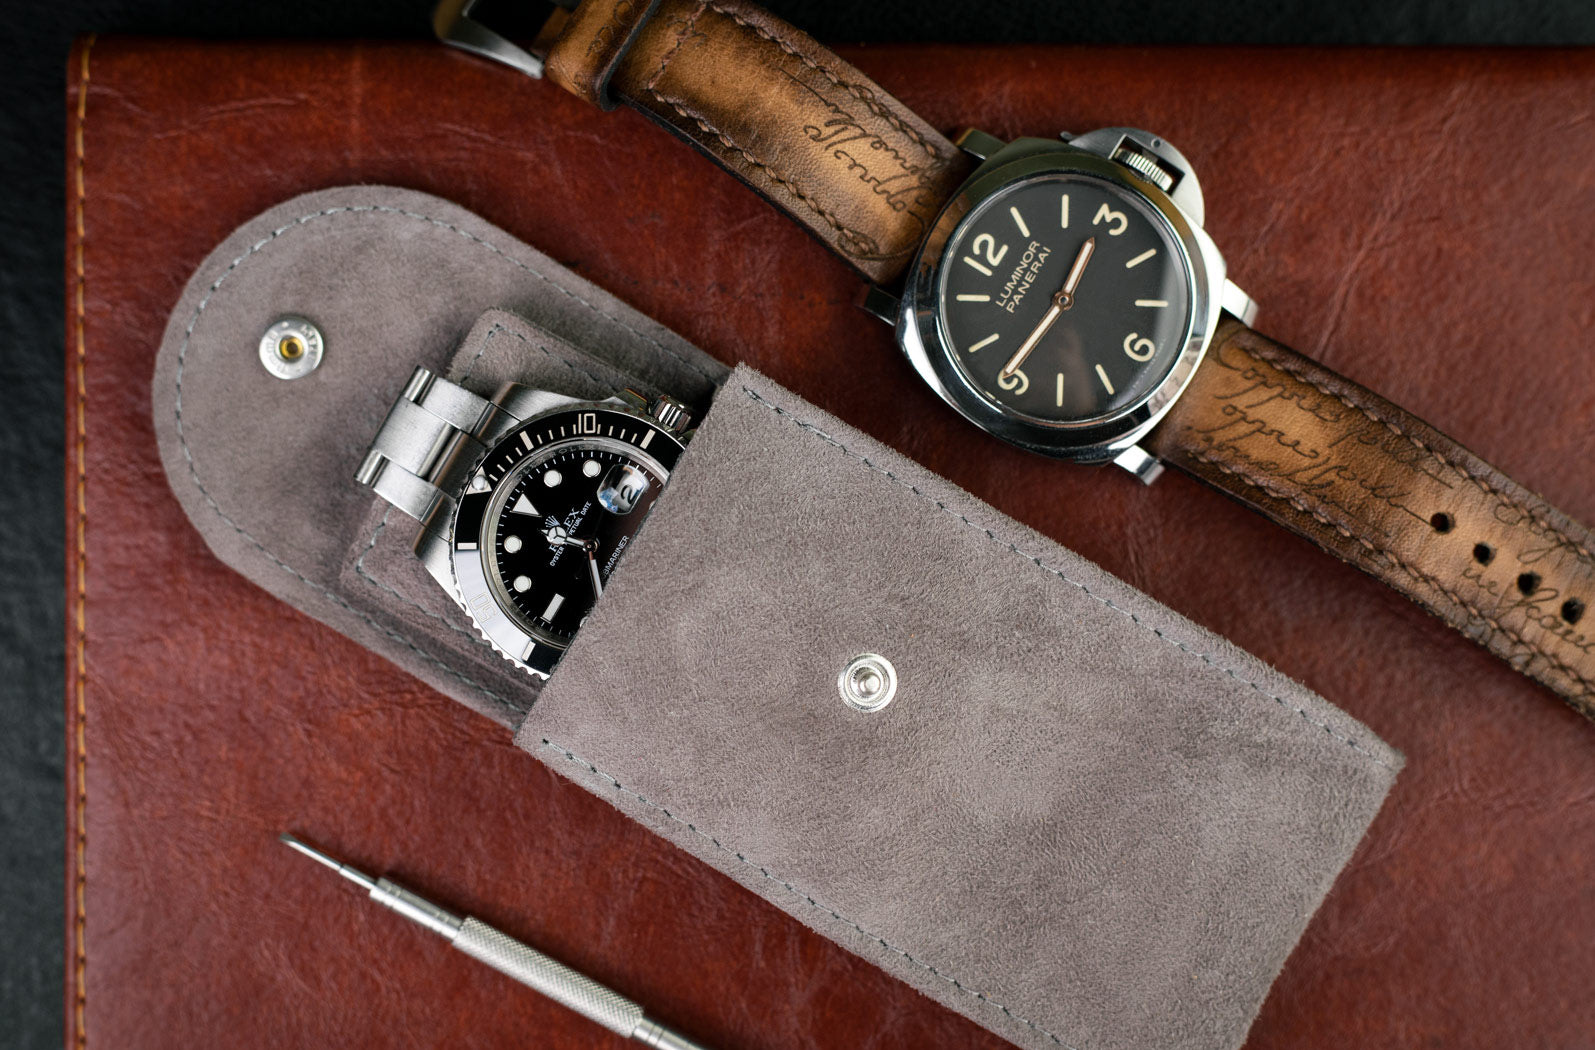 Bosphorus Leather - Watch Pouch